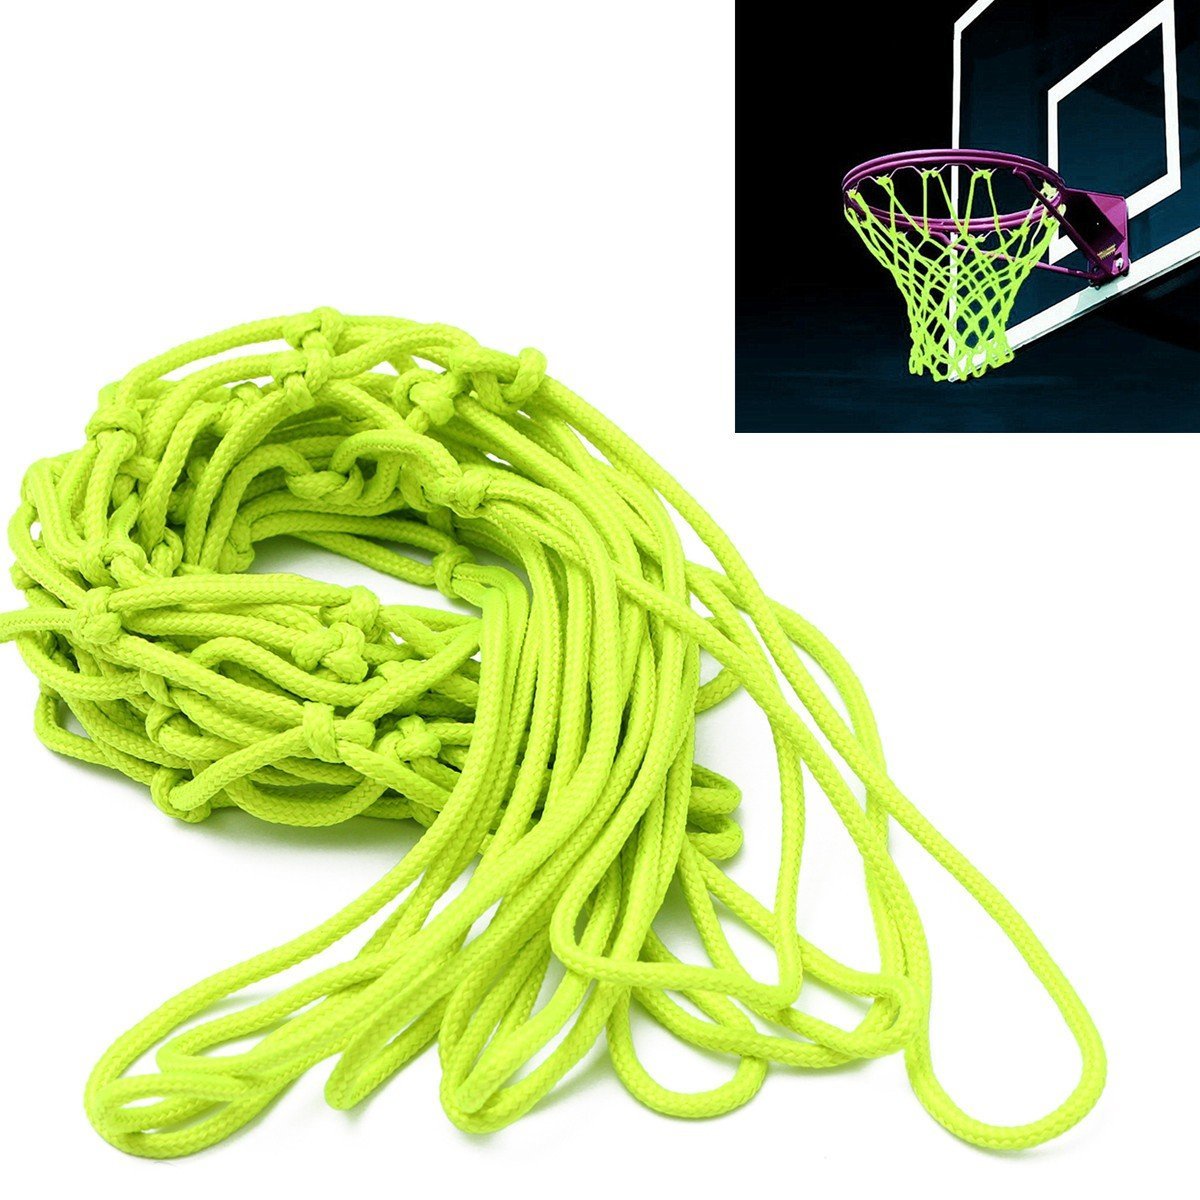 44x32cm-Glow-In-The-Dark-Basketball-Net-Nylon-Abrasion-Resistant-Easy-to-Install-Outdoor-Indoor-Bask-1884146-8